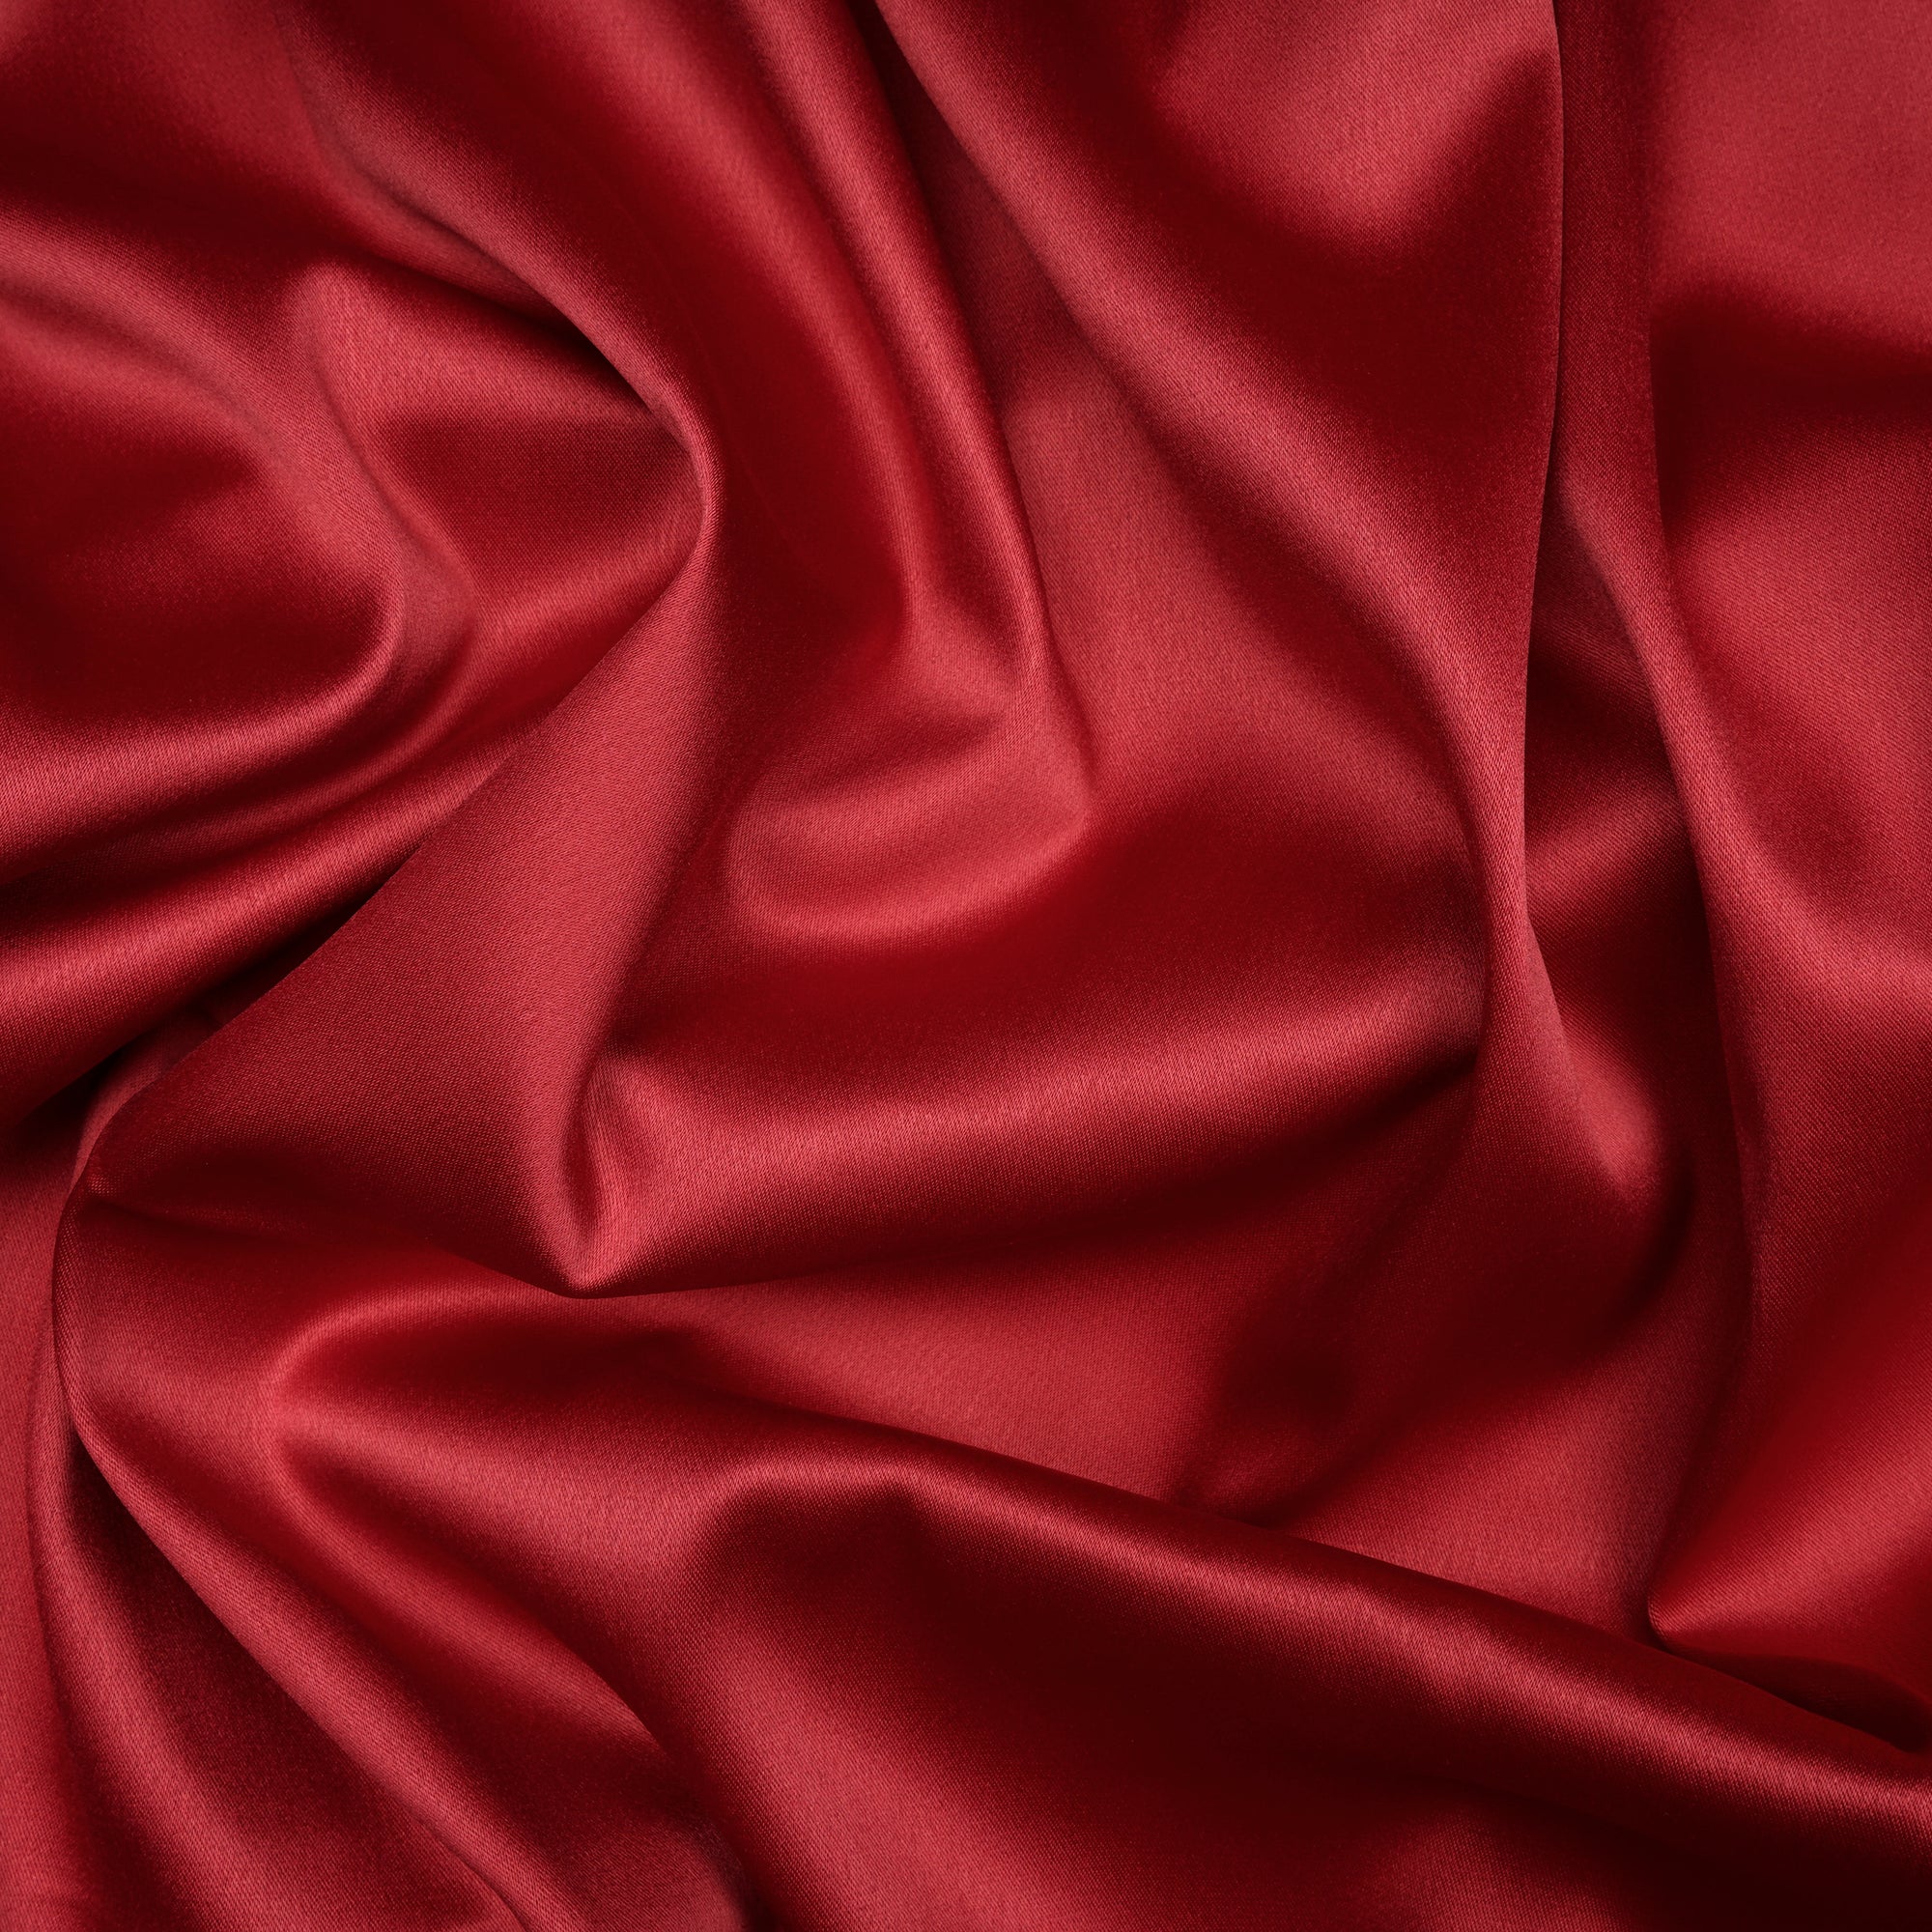 Maroon Solid Dyed Imported Duchess Satin Fabric (60" Width)